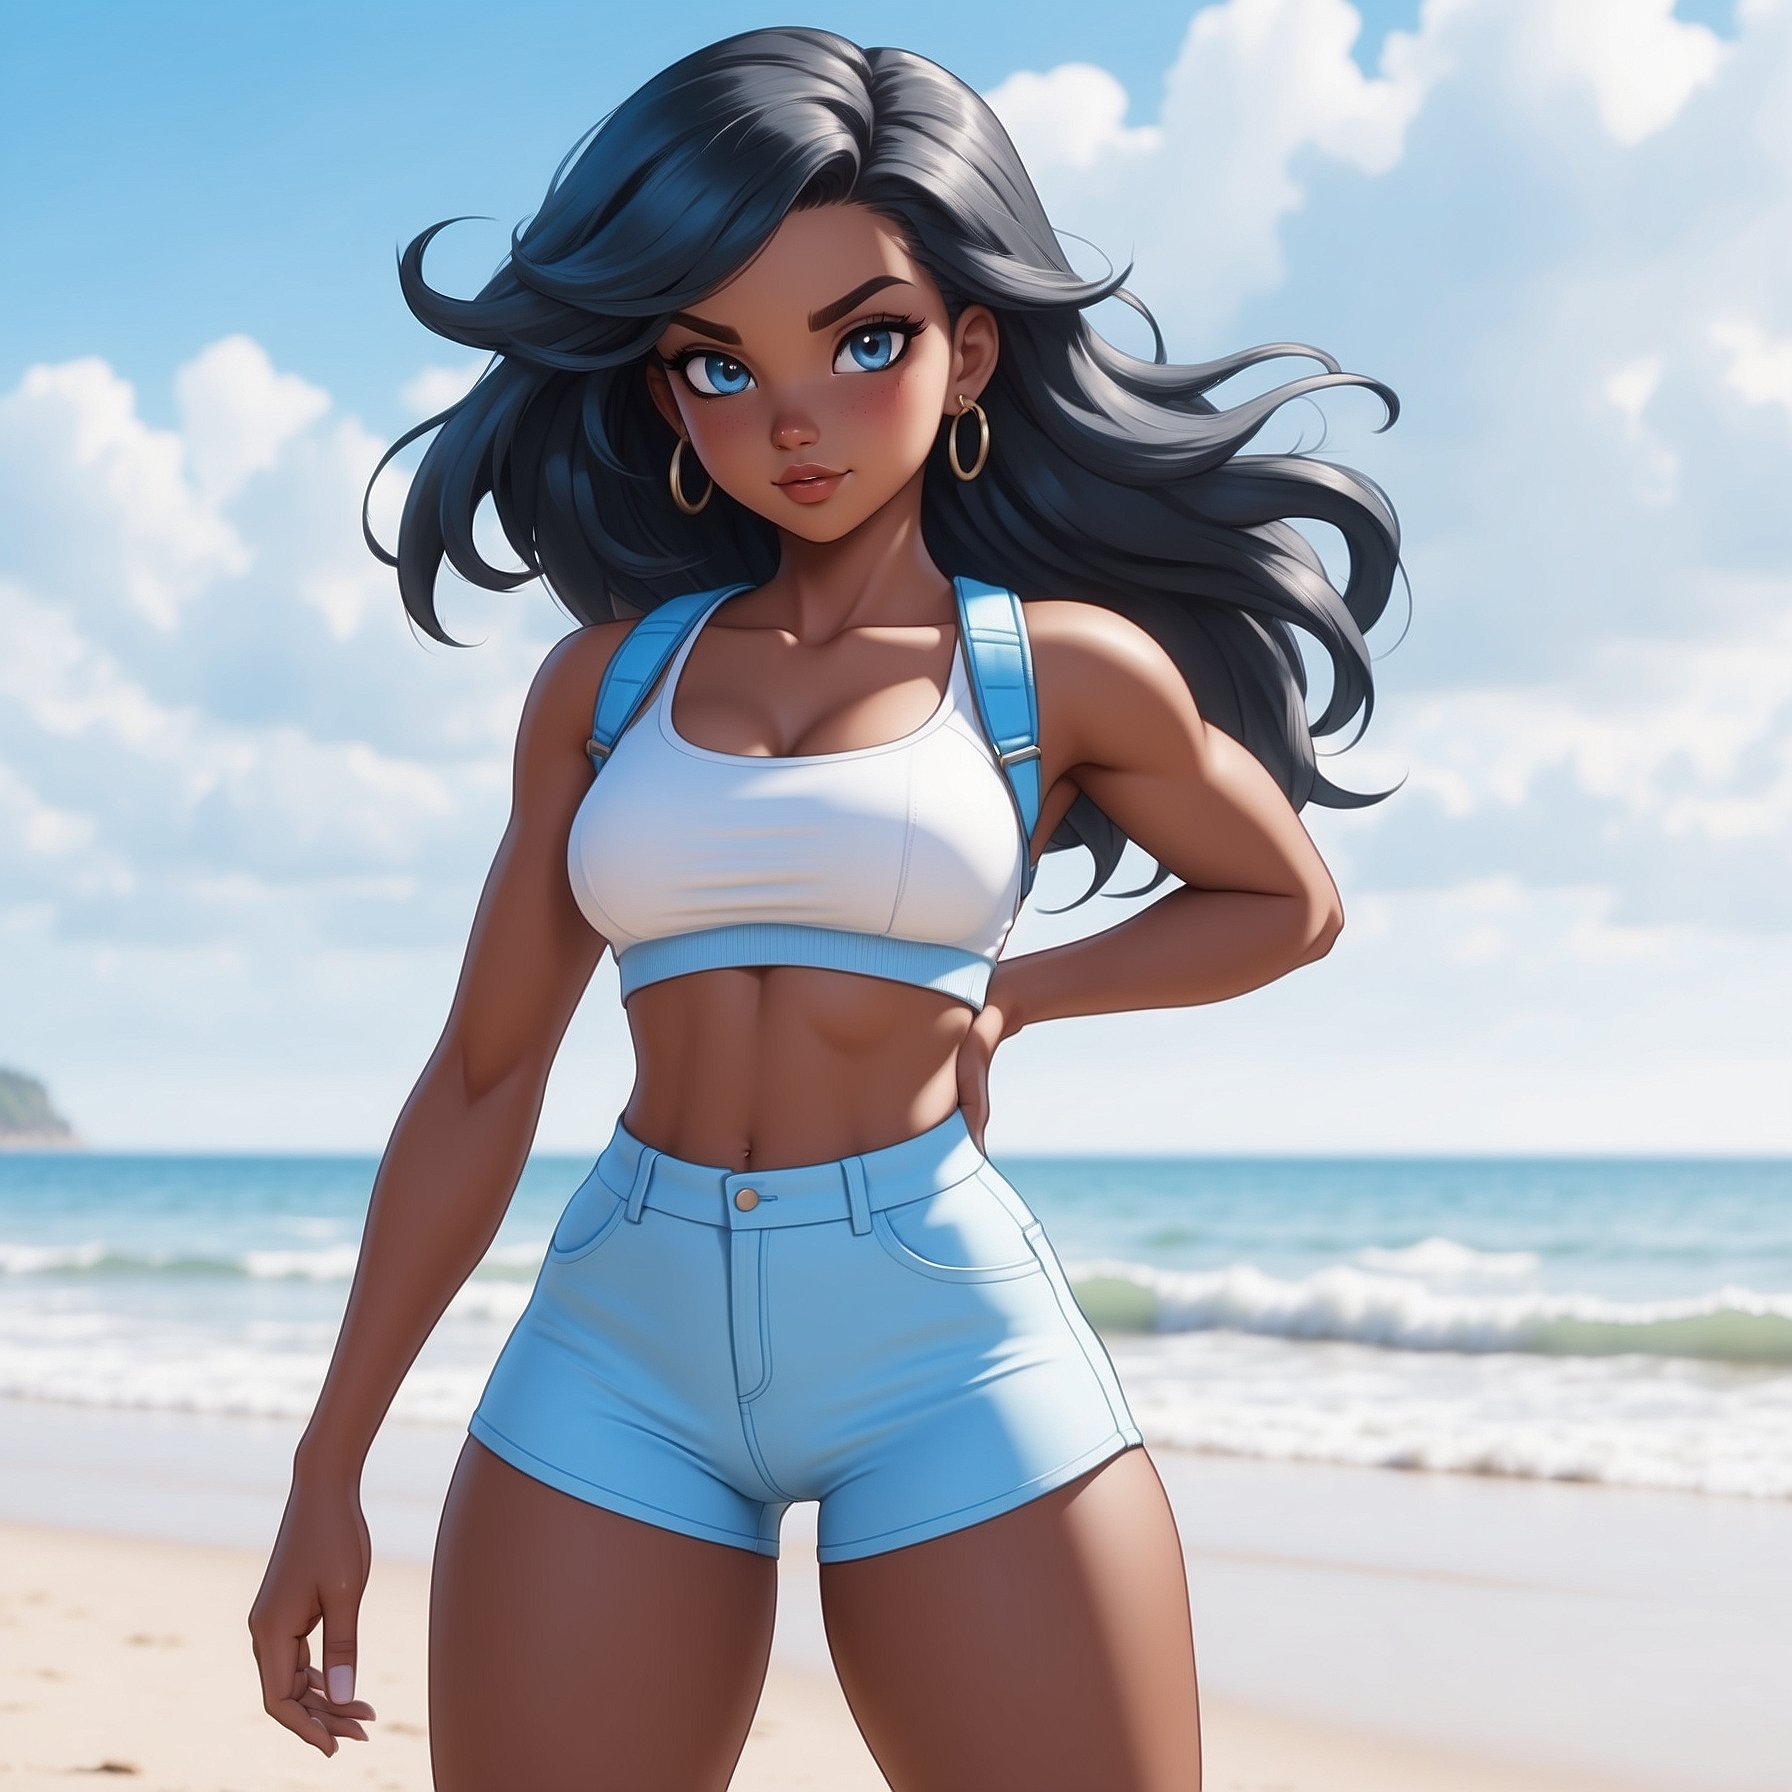 AI Artwork Generated by Leonardo AI - Cartoon Style Girl on the Beach, shared on the LaPrompt marketplace.